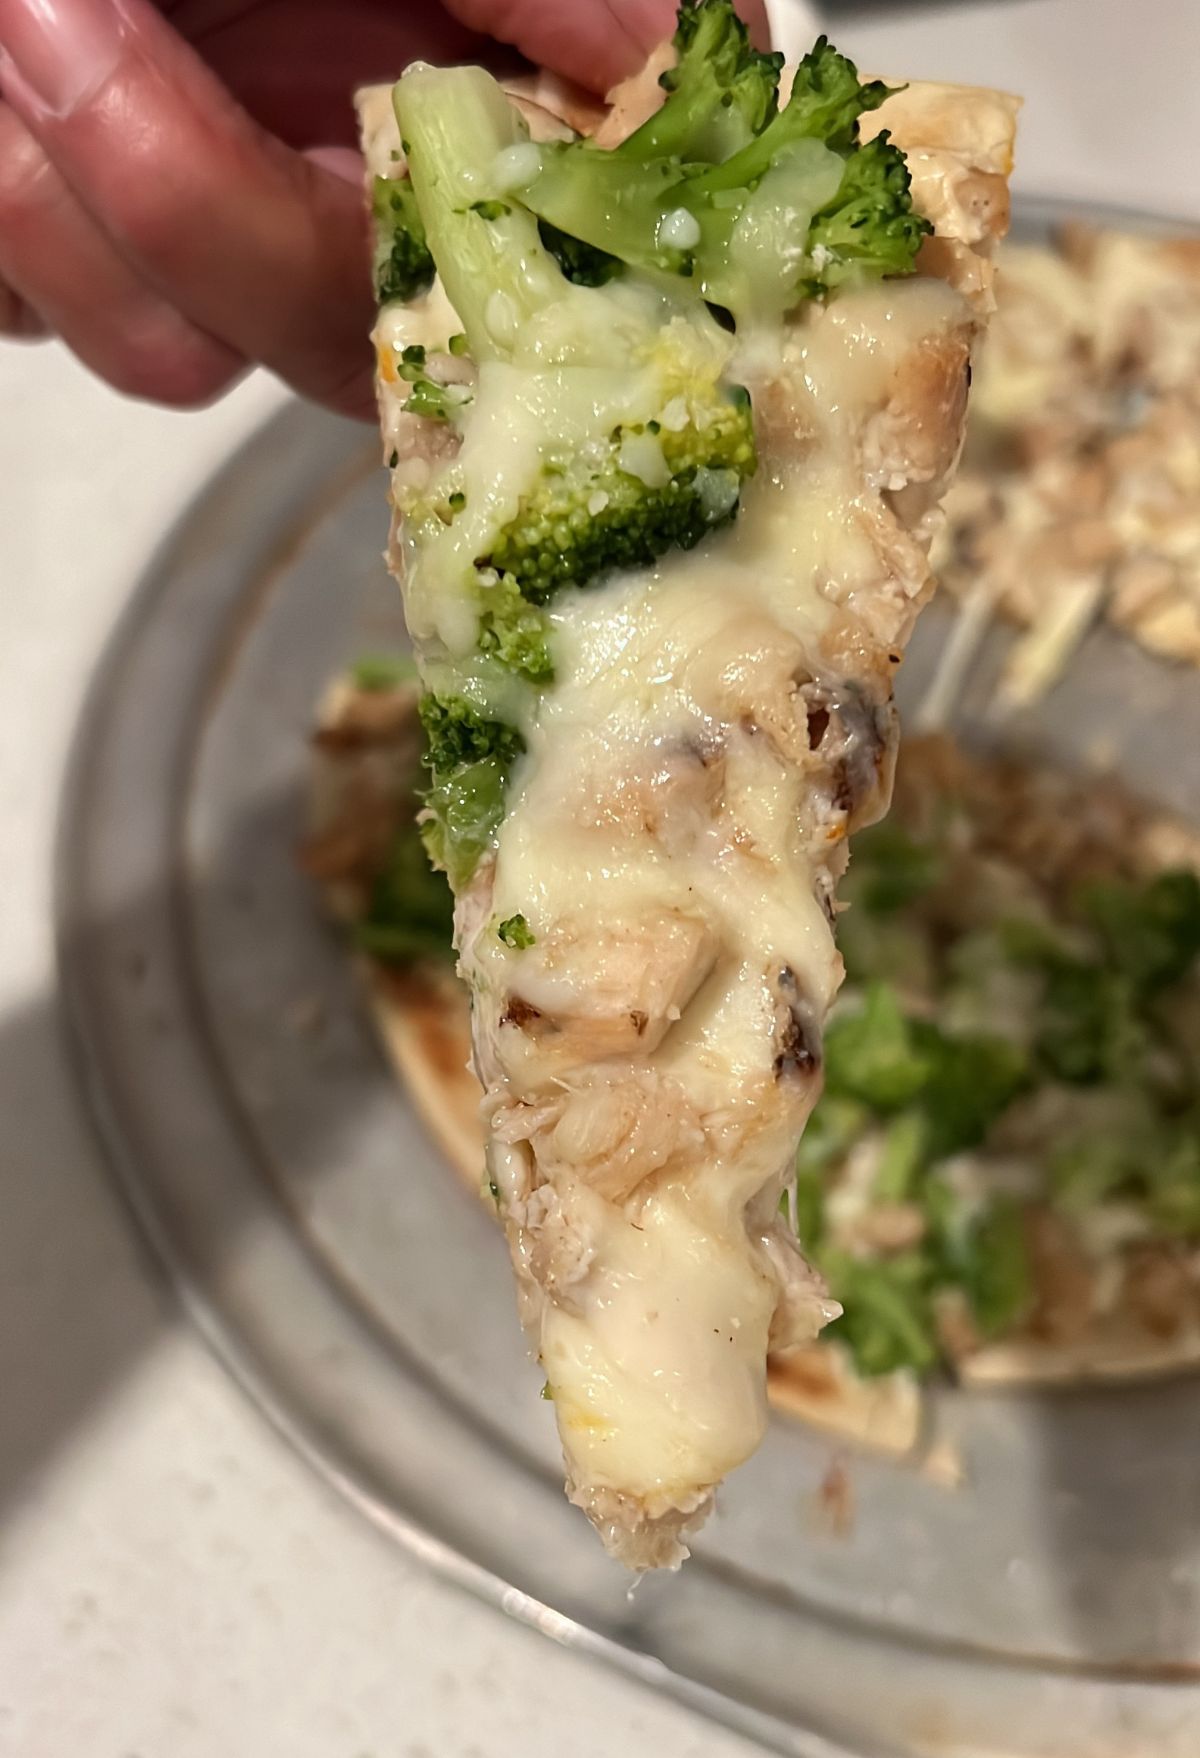 A person holding up a slice of pizza with broccoli and cheese.